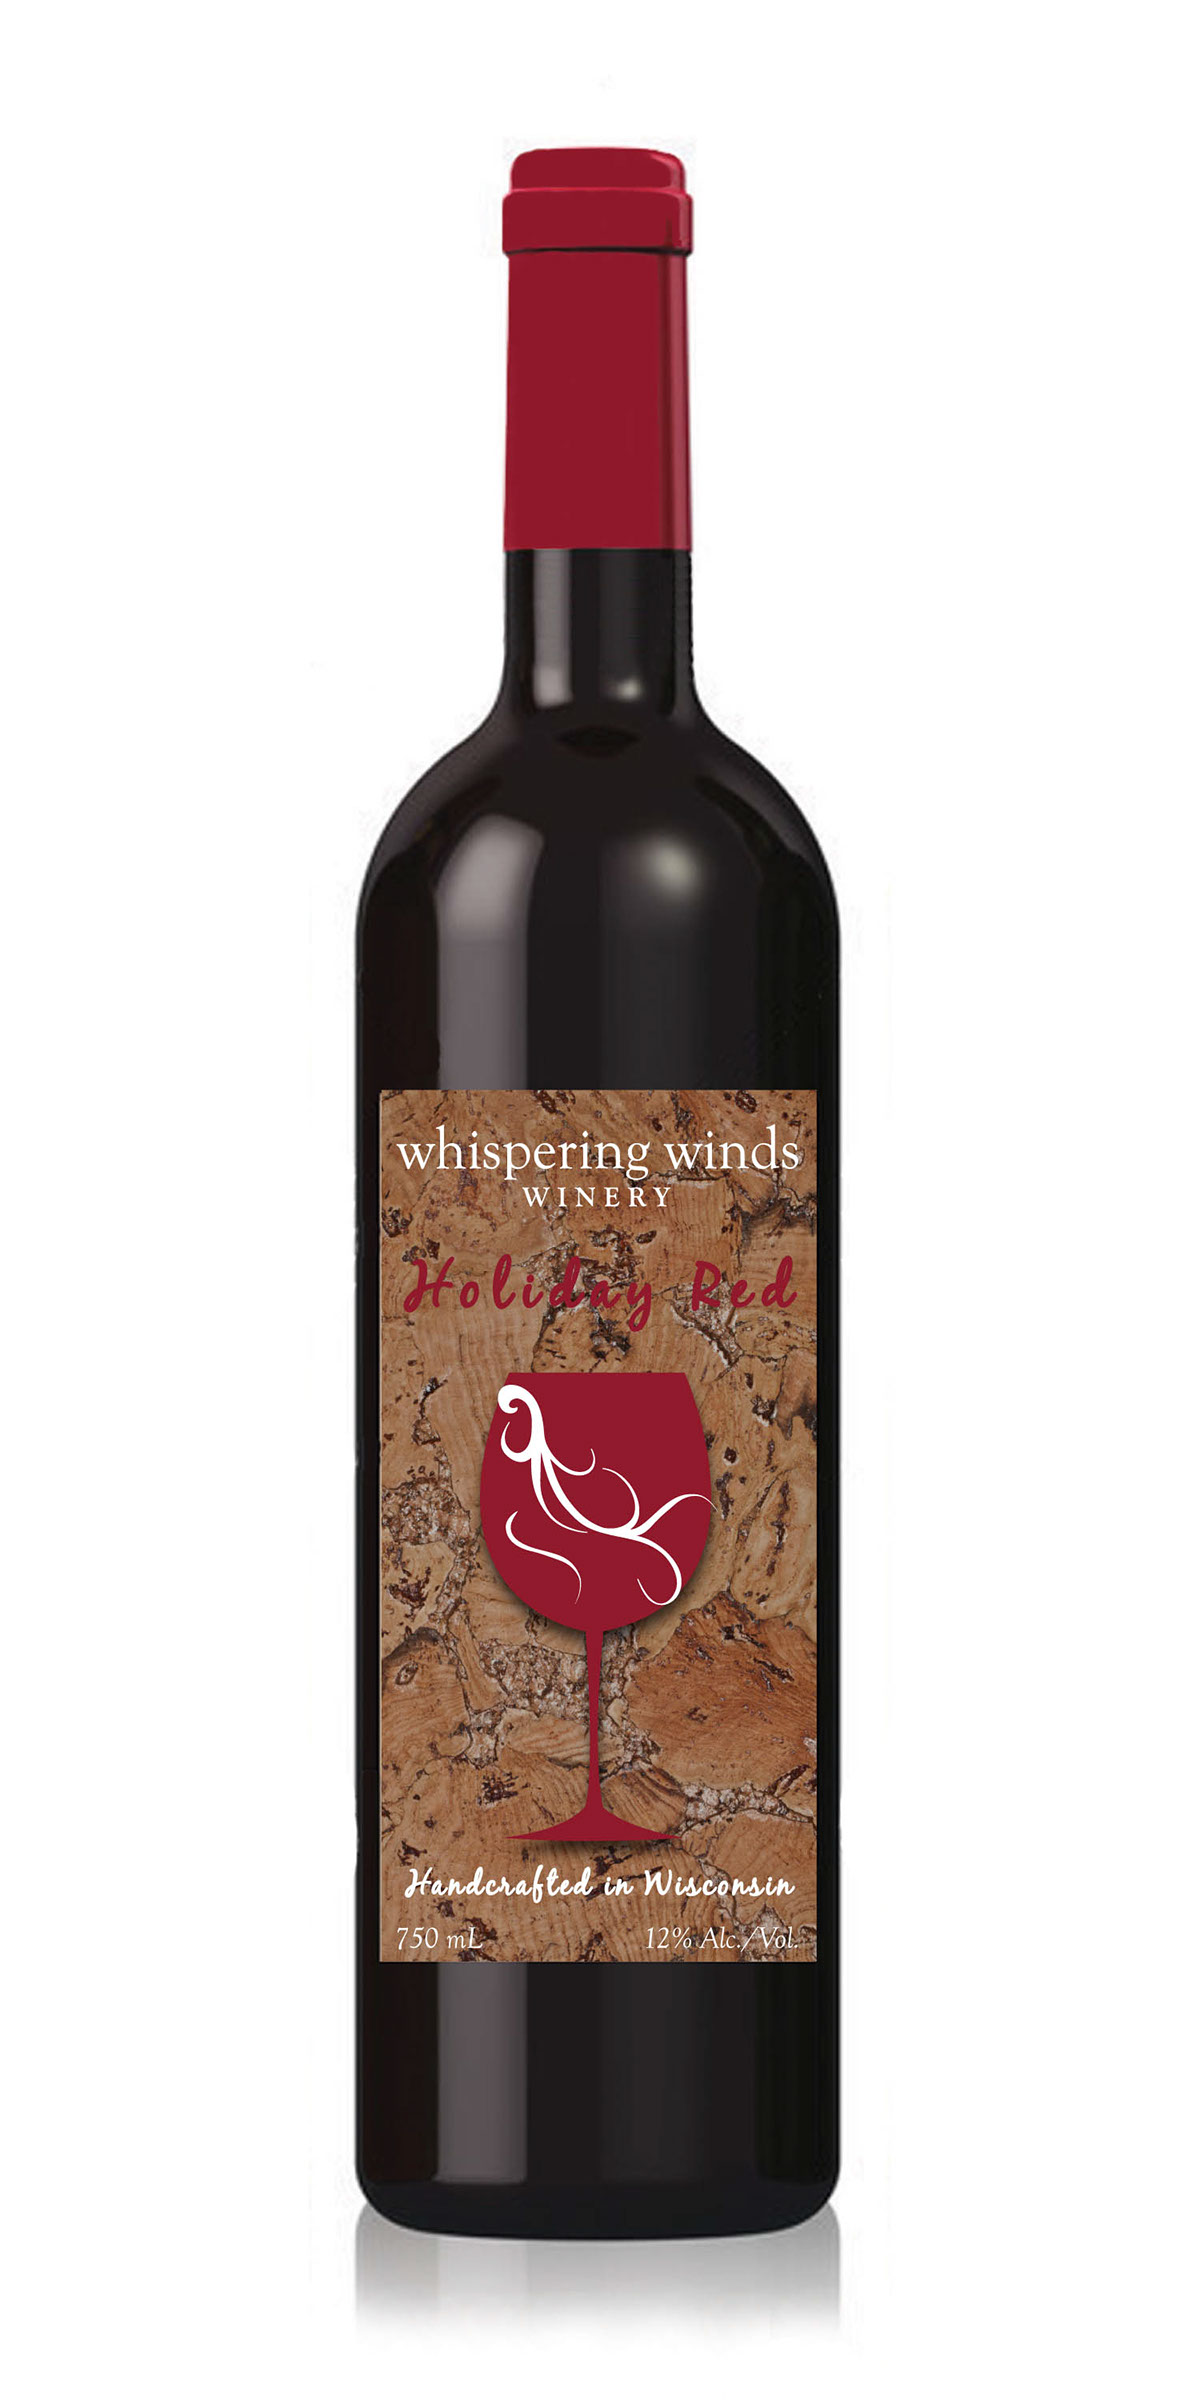 Whispering wind wine Label yellow green red White Wisconsin local bottle rebranding